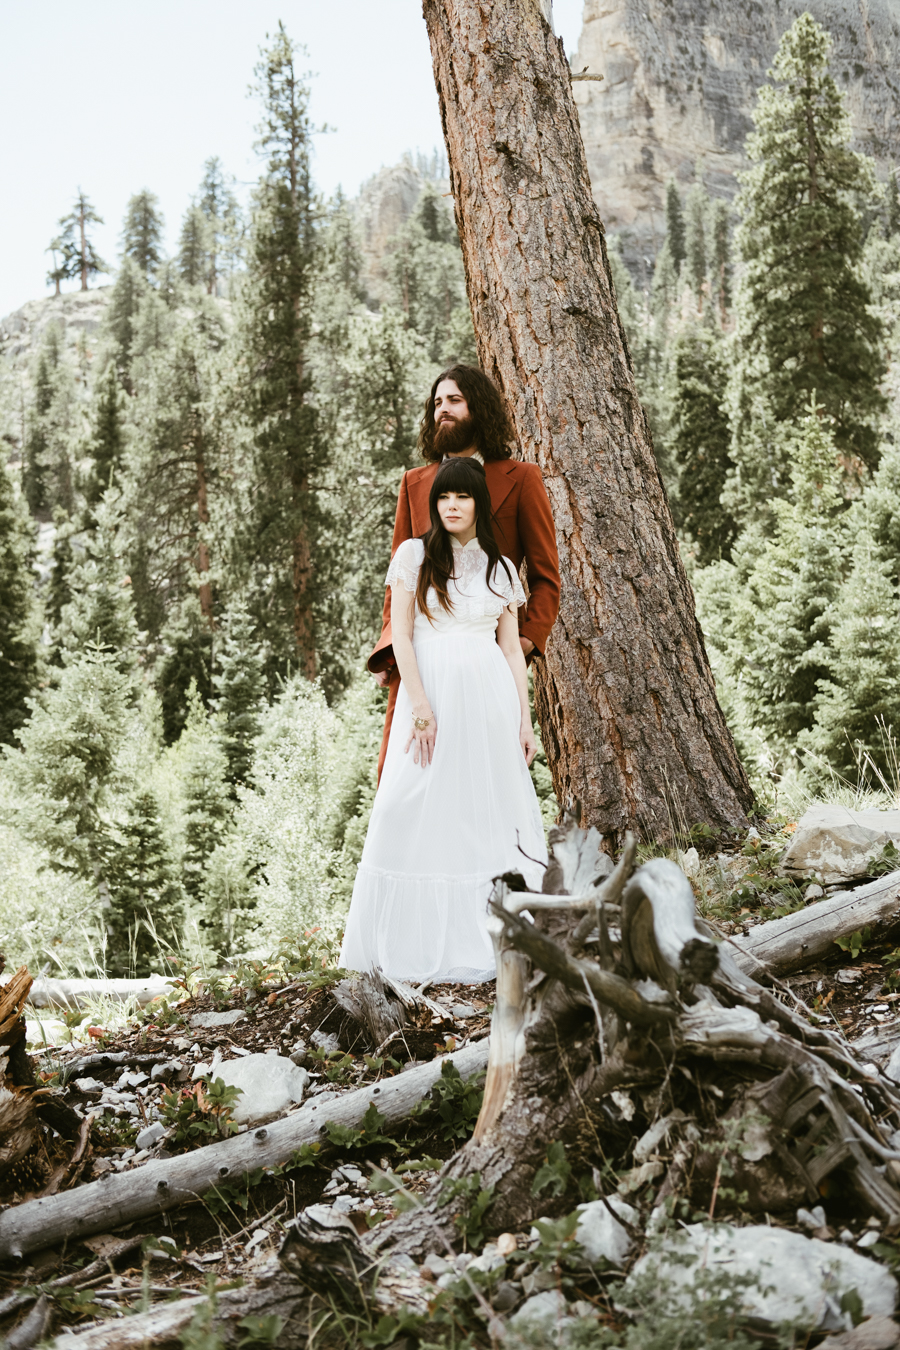 Engaged Couple in the Mountains - Andi Artigue Photography